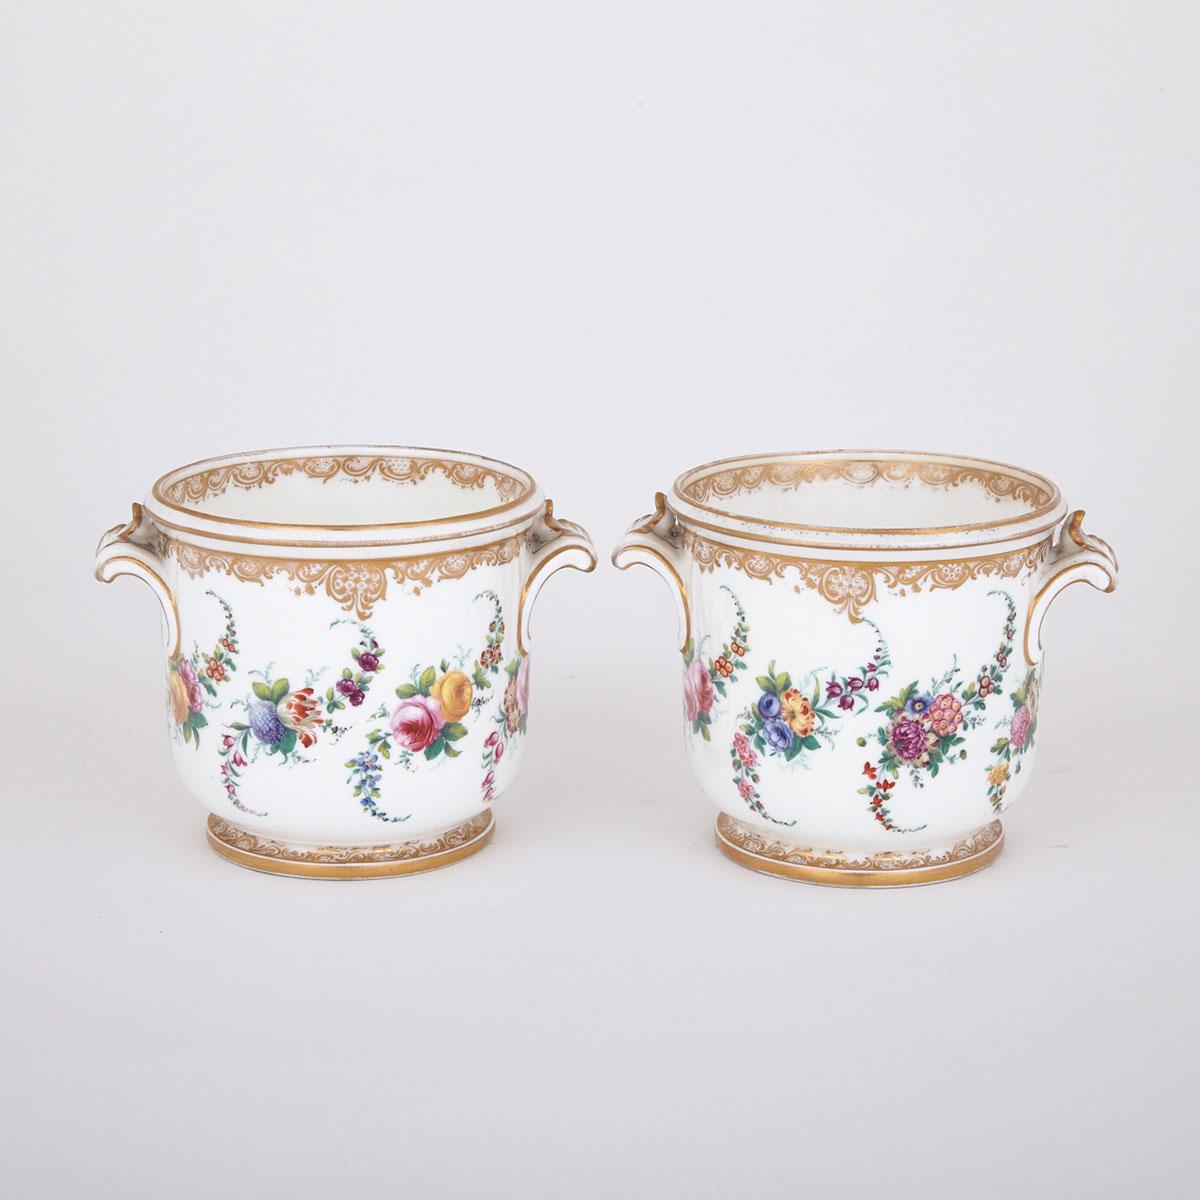 Pair of English Porcelain Cachepots, 19th century